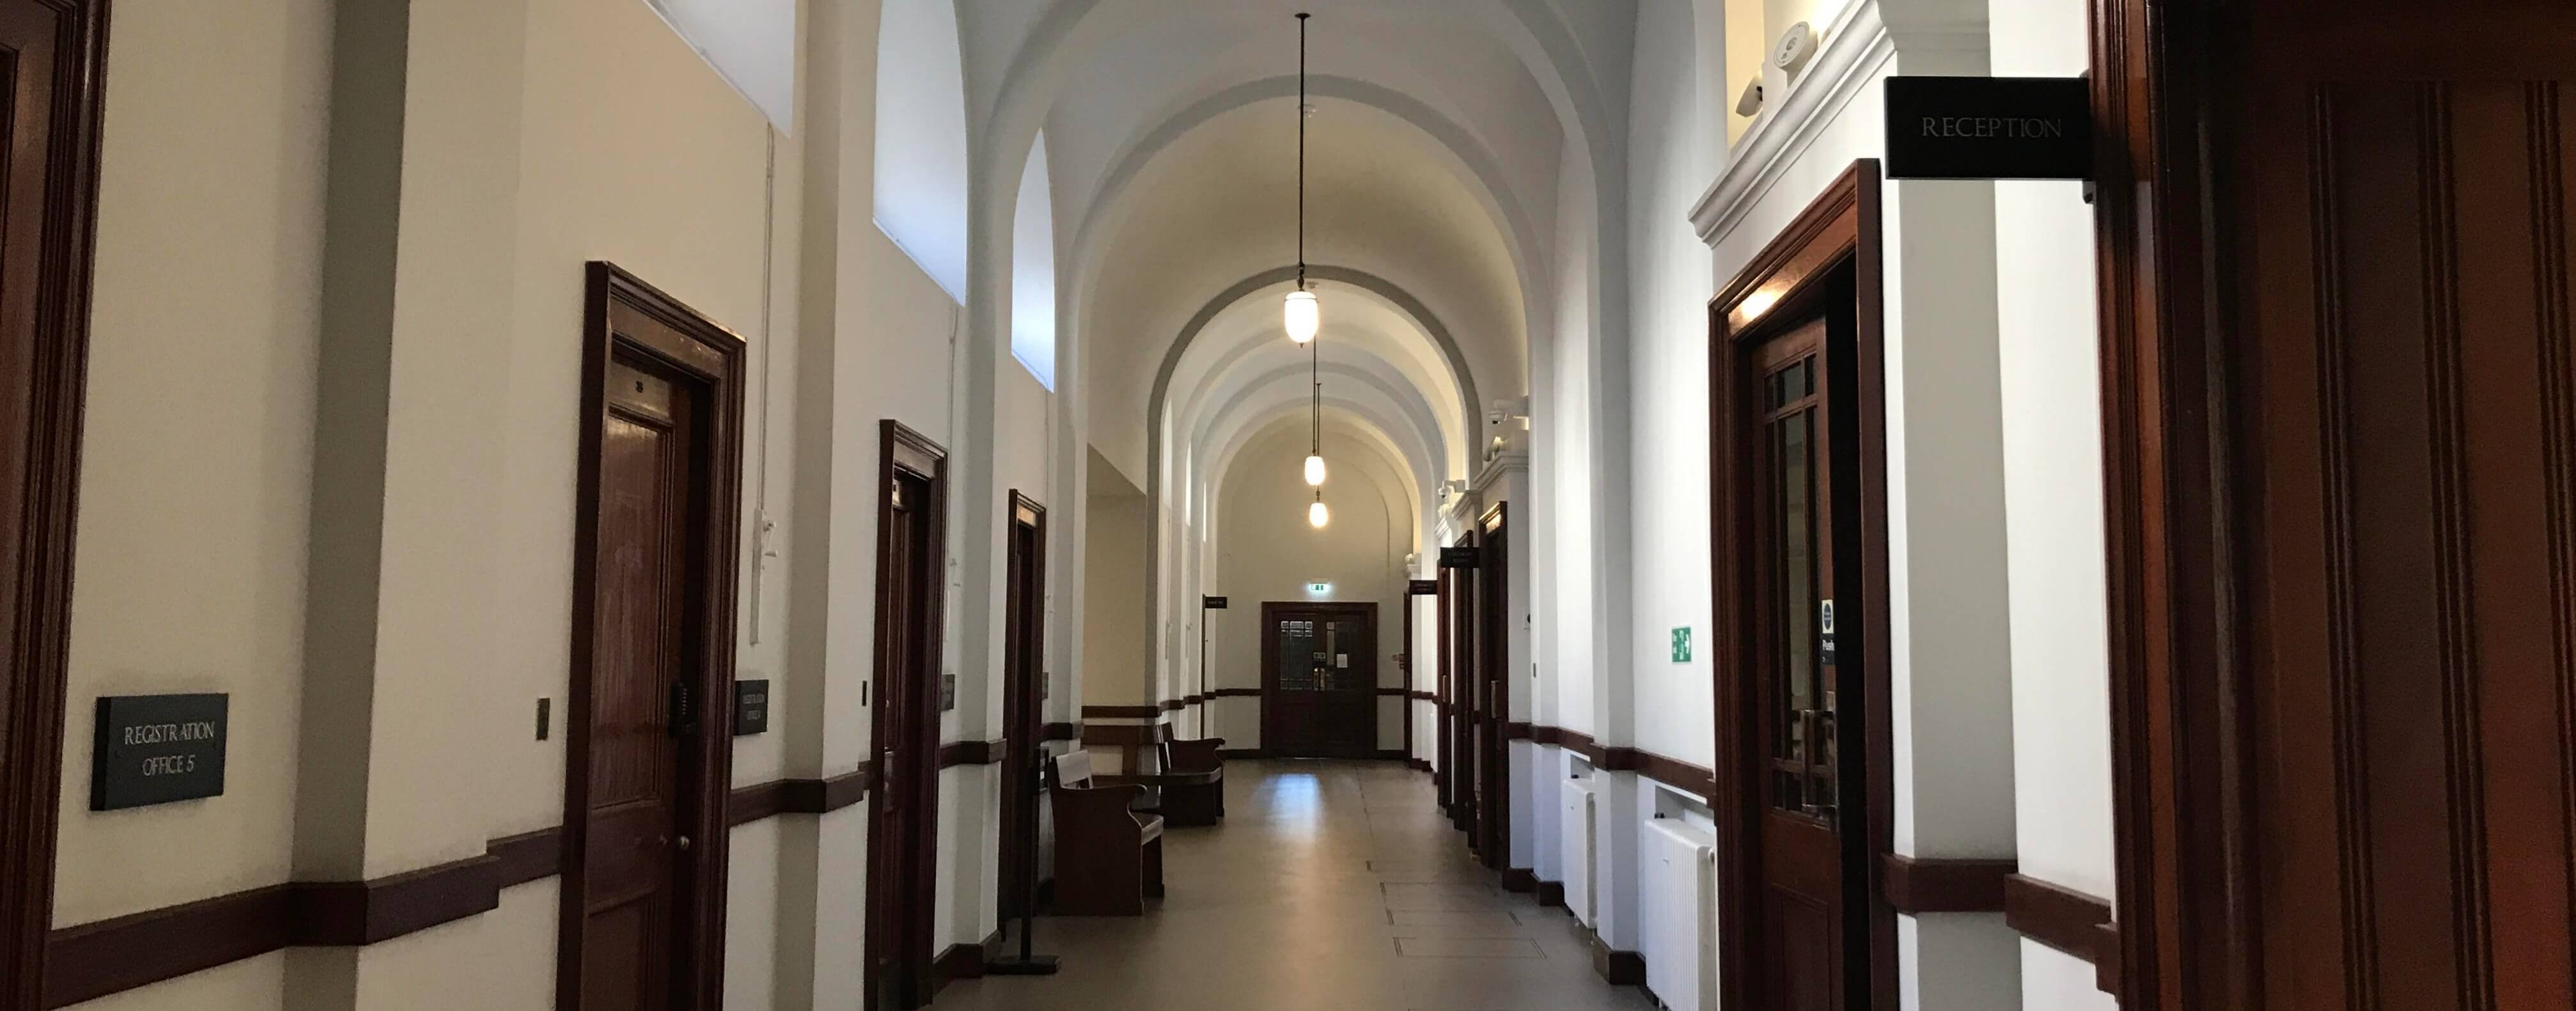 The entrance and hallway of the Old court house